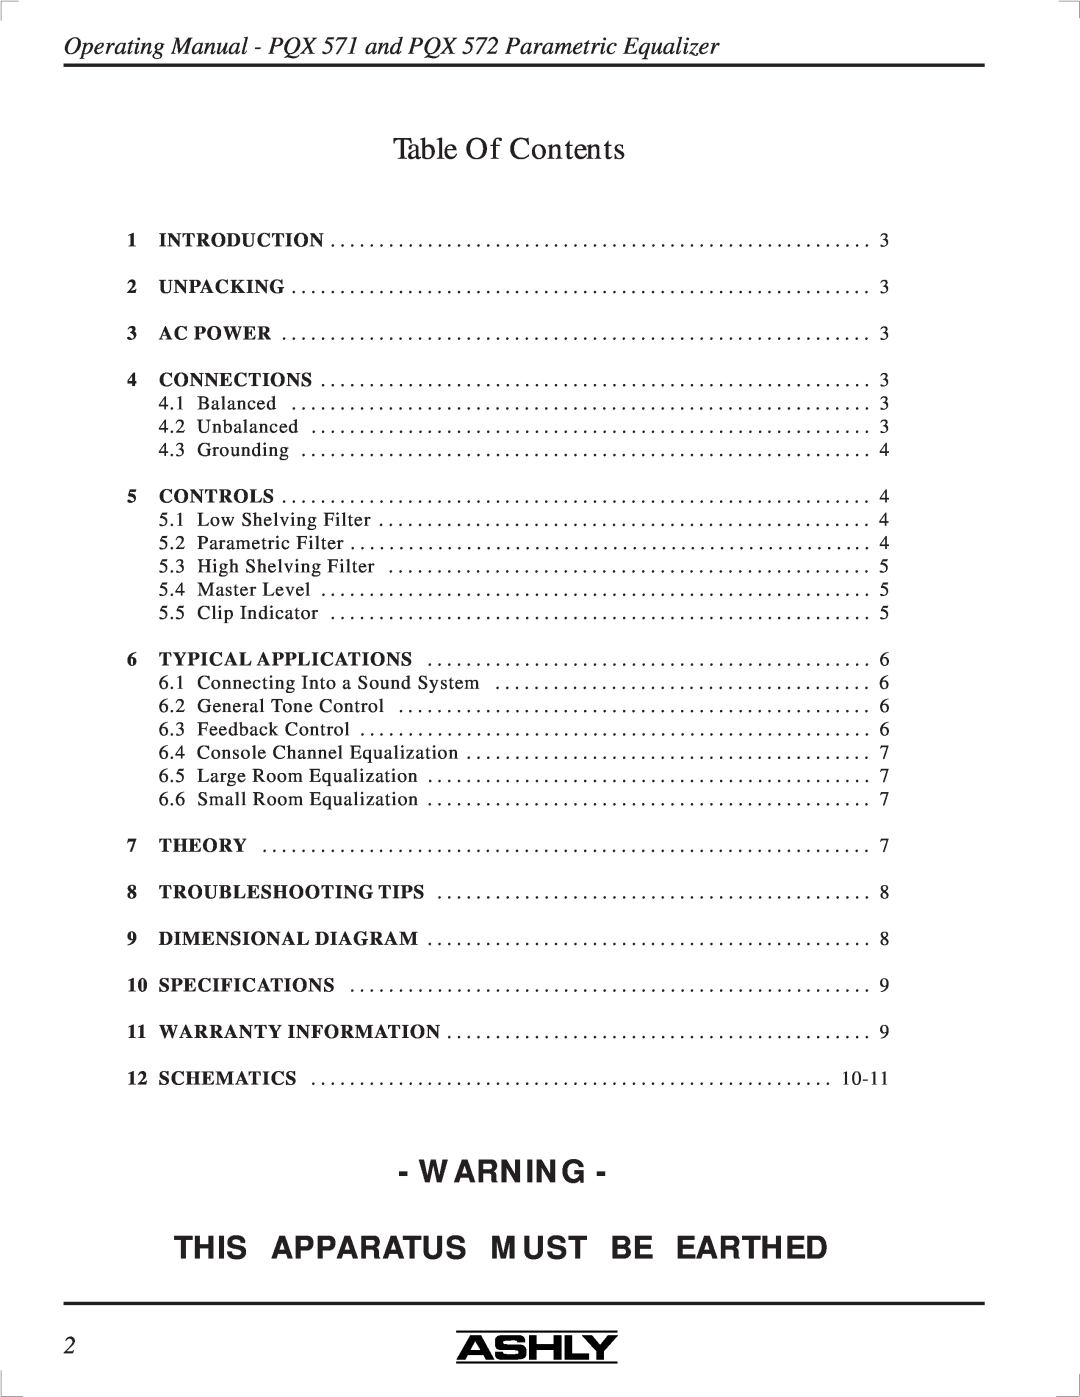 Ashly PQX-572, PQX-571 manual This Apparatus Must Be Earthed, Table Of Contents 